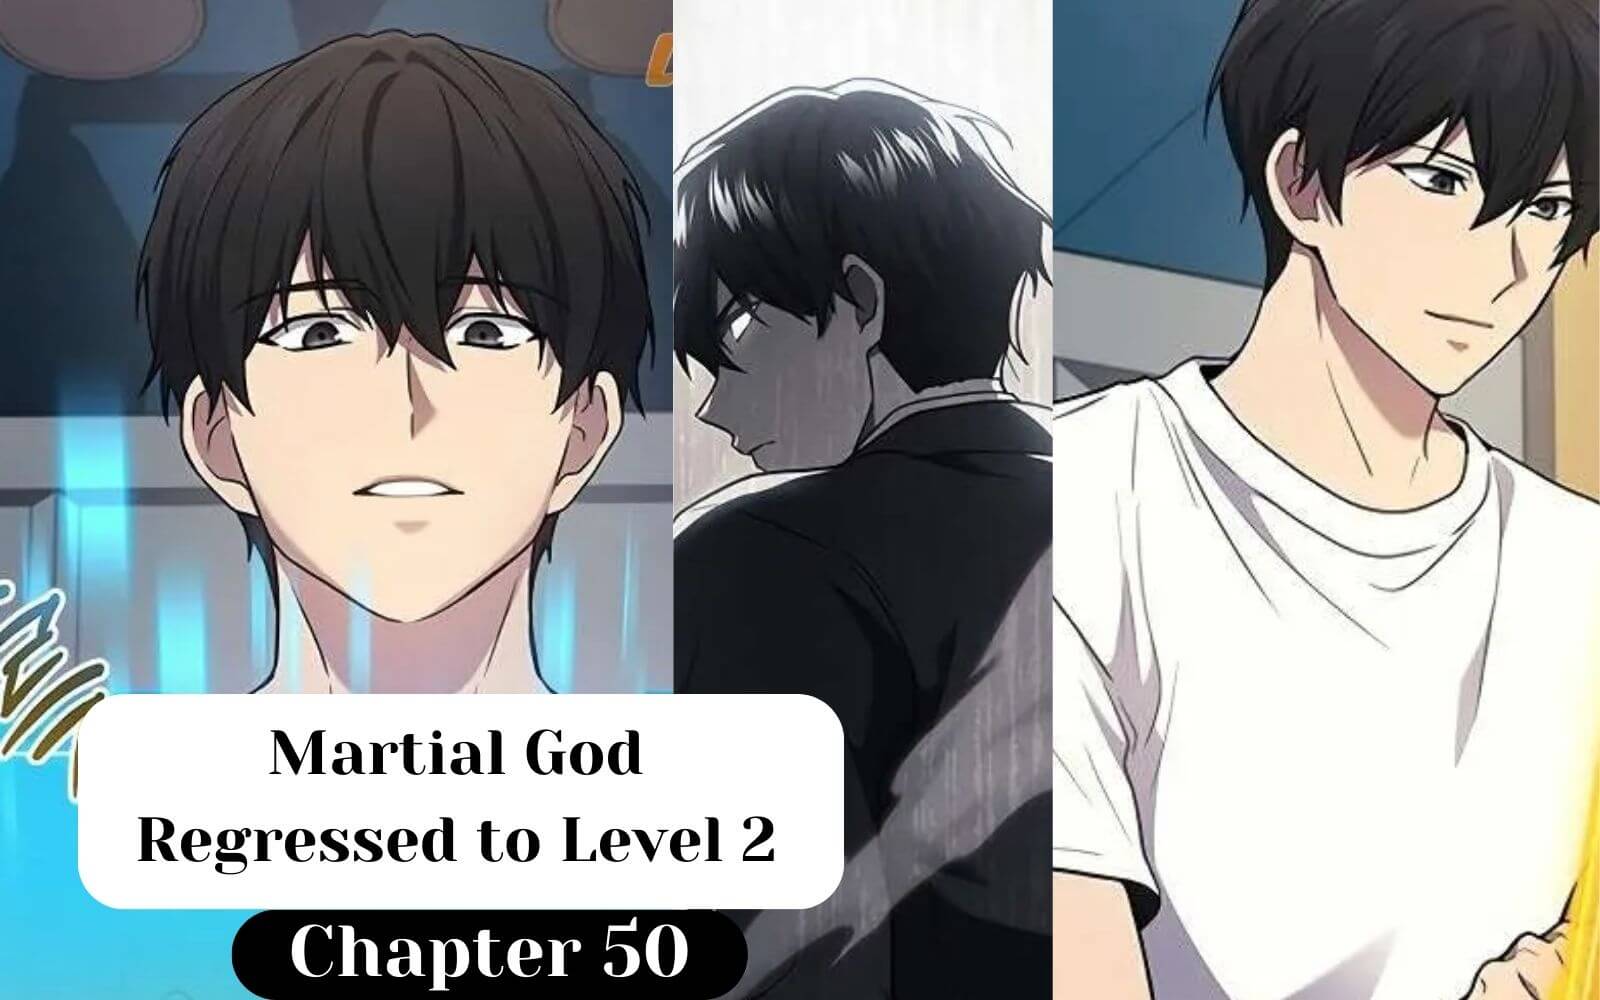 Martial God Regressed to Level 2 Chapter 50